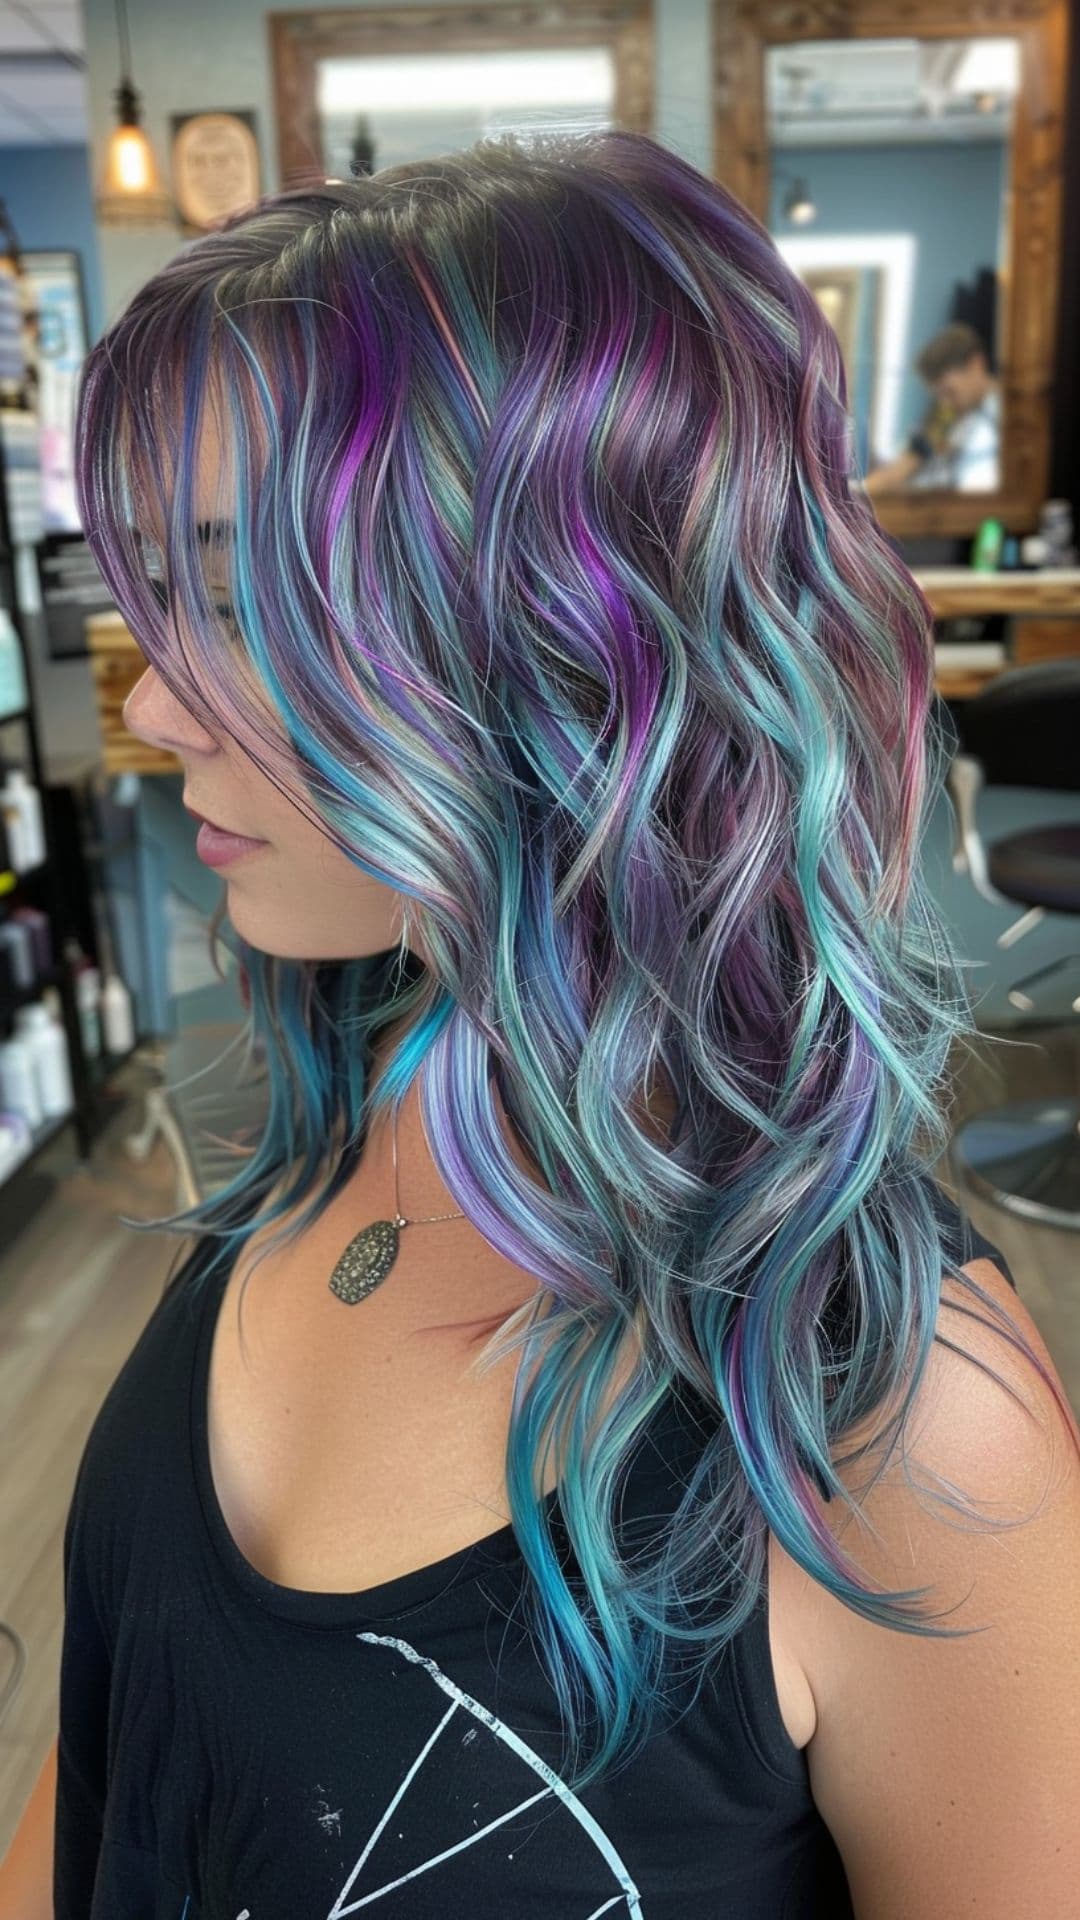 A woman modelling a teal and purple hair.